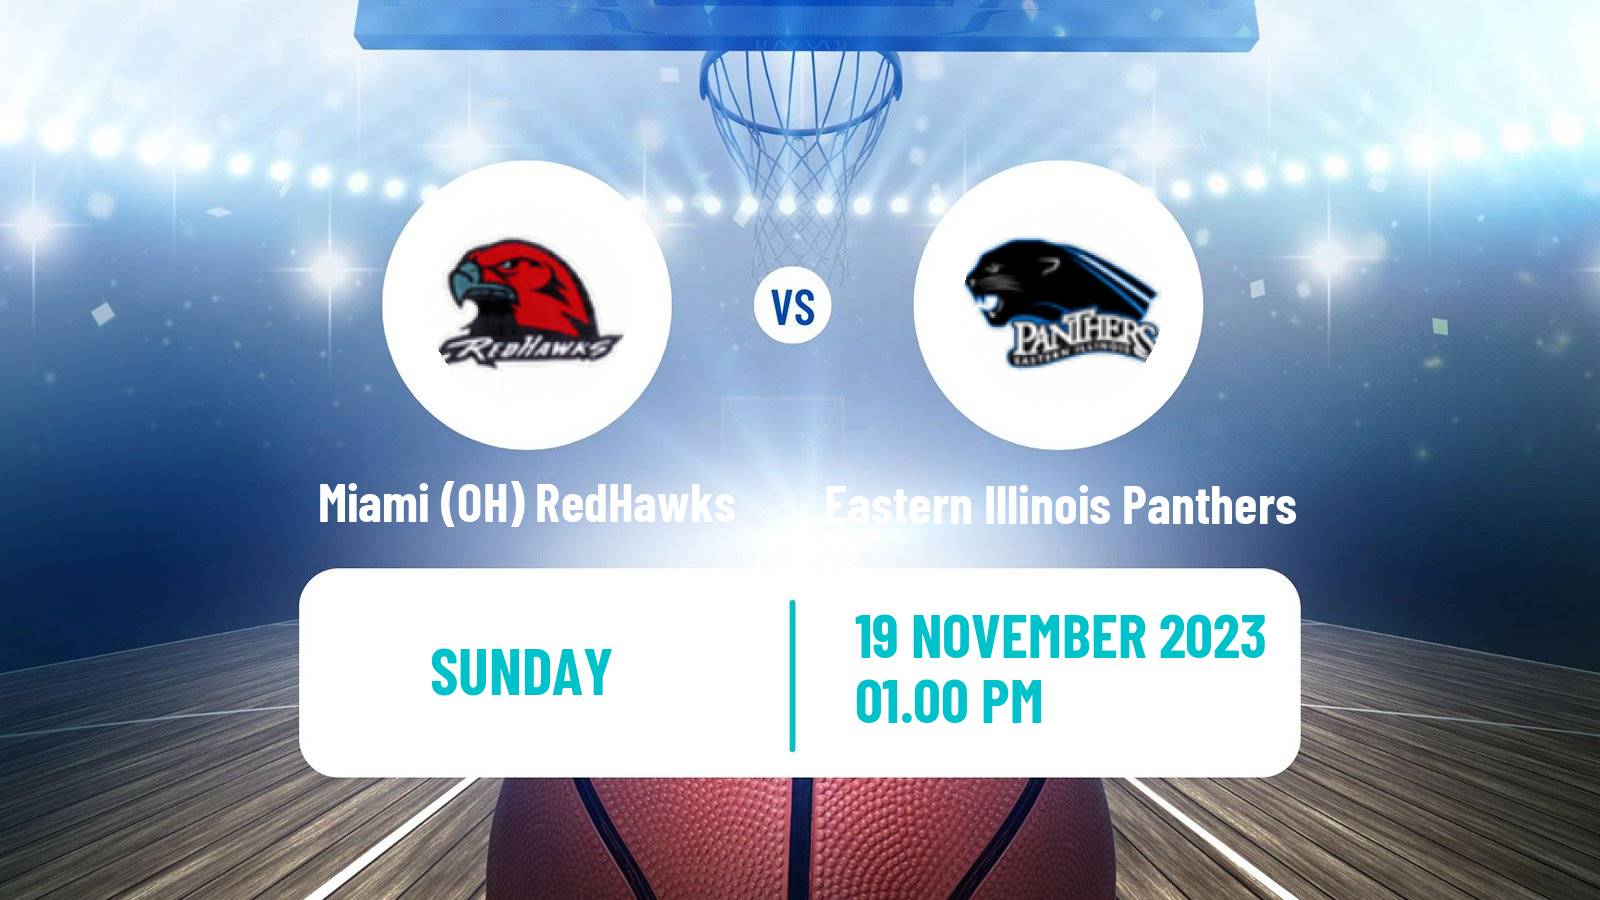 Basketball NCAA College Basketball Miami (OH) RedHawks - Eastern Illinois Panthers